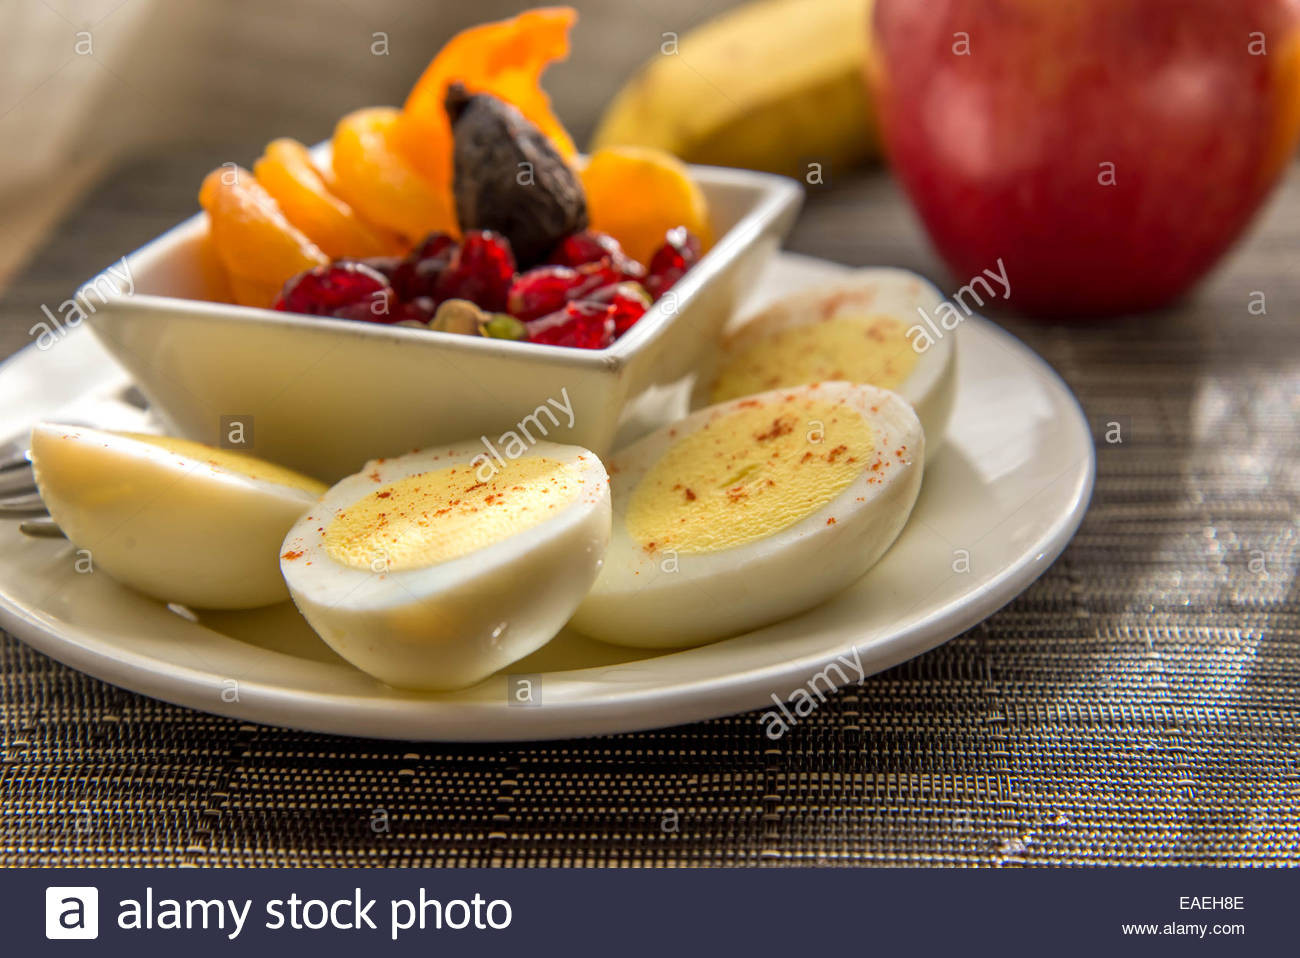 Healthy Breakfast With Hard Boiled Eggs
 Sliced hard boiled eggs and fruit healthy breakfast Stock